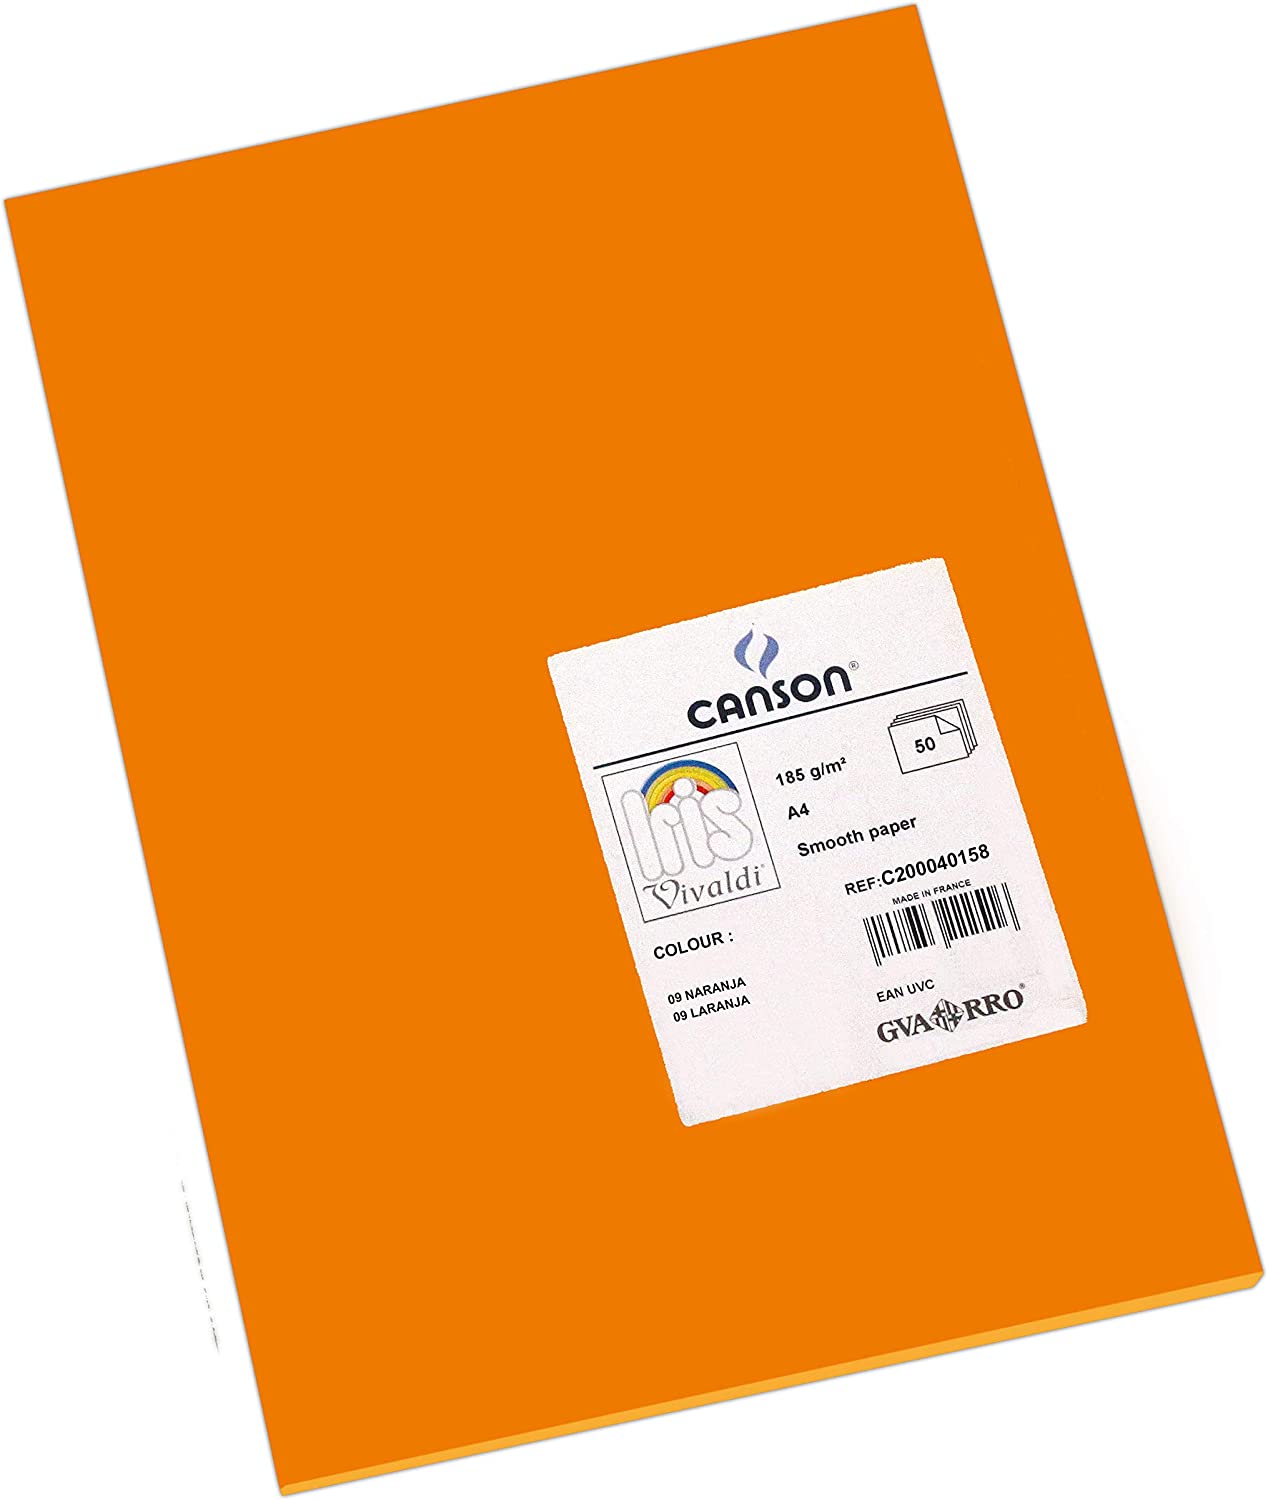 Ultramarine Pack of 50 Sheets Canson Iris Vivaldi A4 185 gsm Smooth Colour Paper 